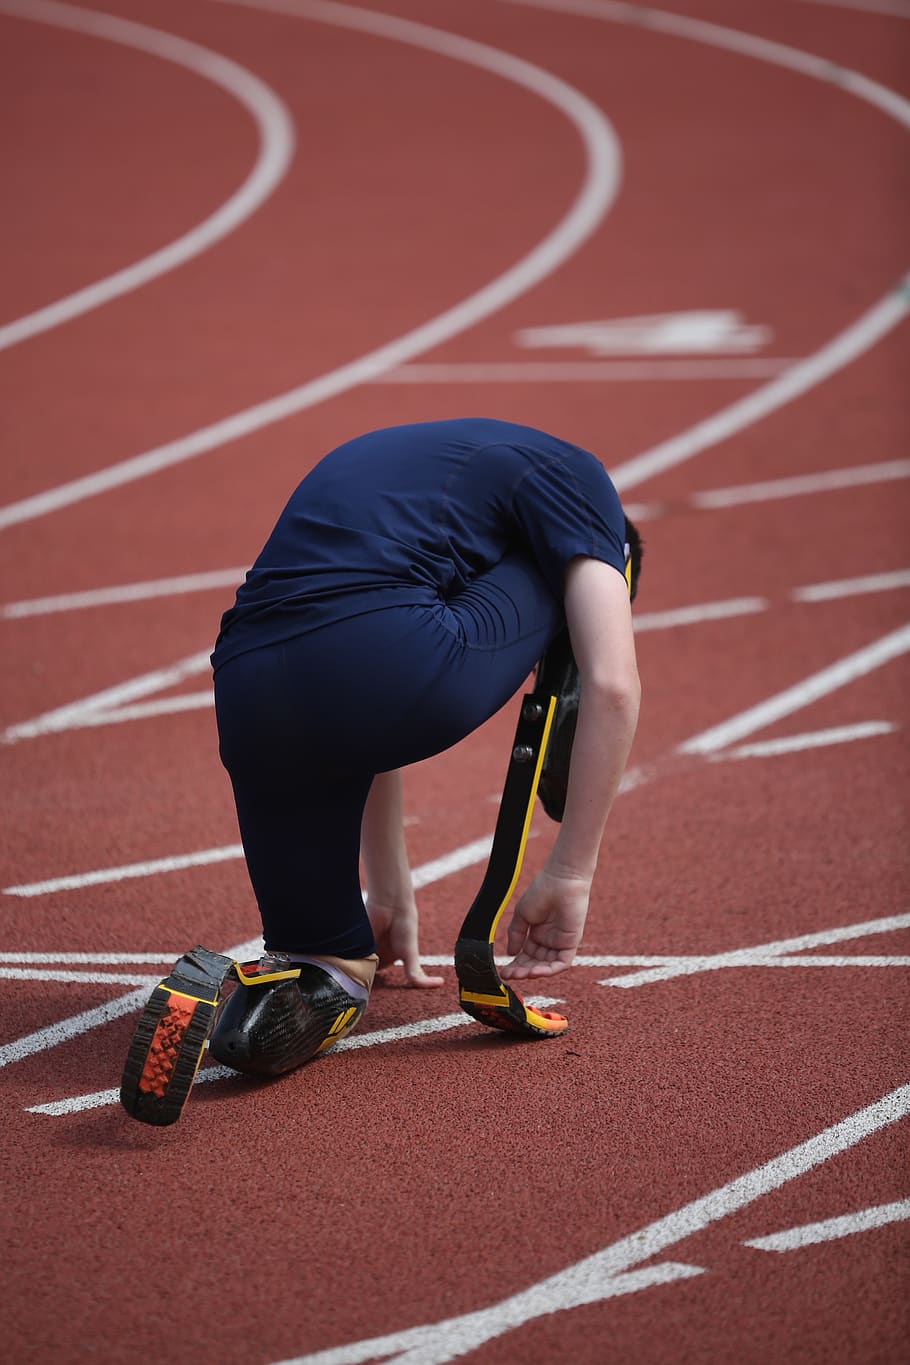 sport, prosthetic, disability, disabled, run, track, track and field, running track, exercising, competition